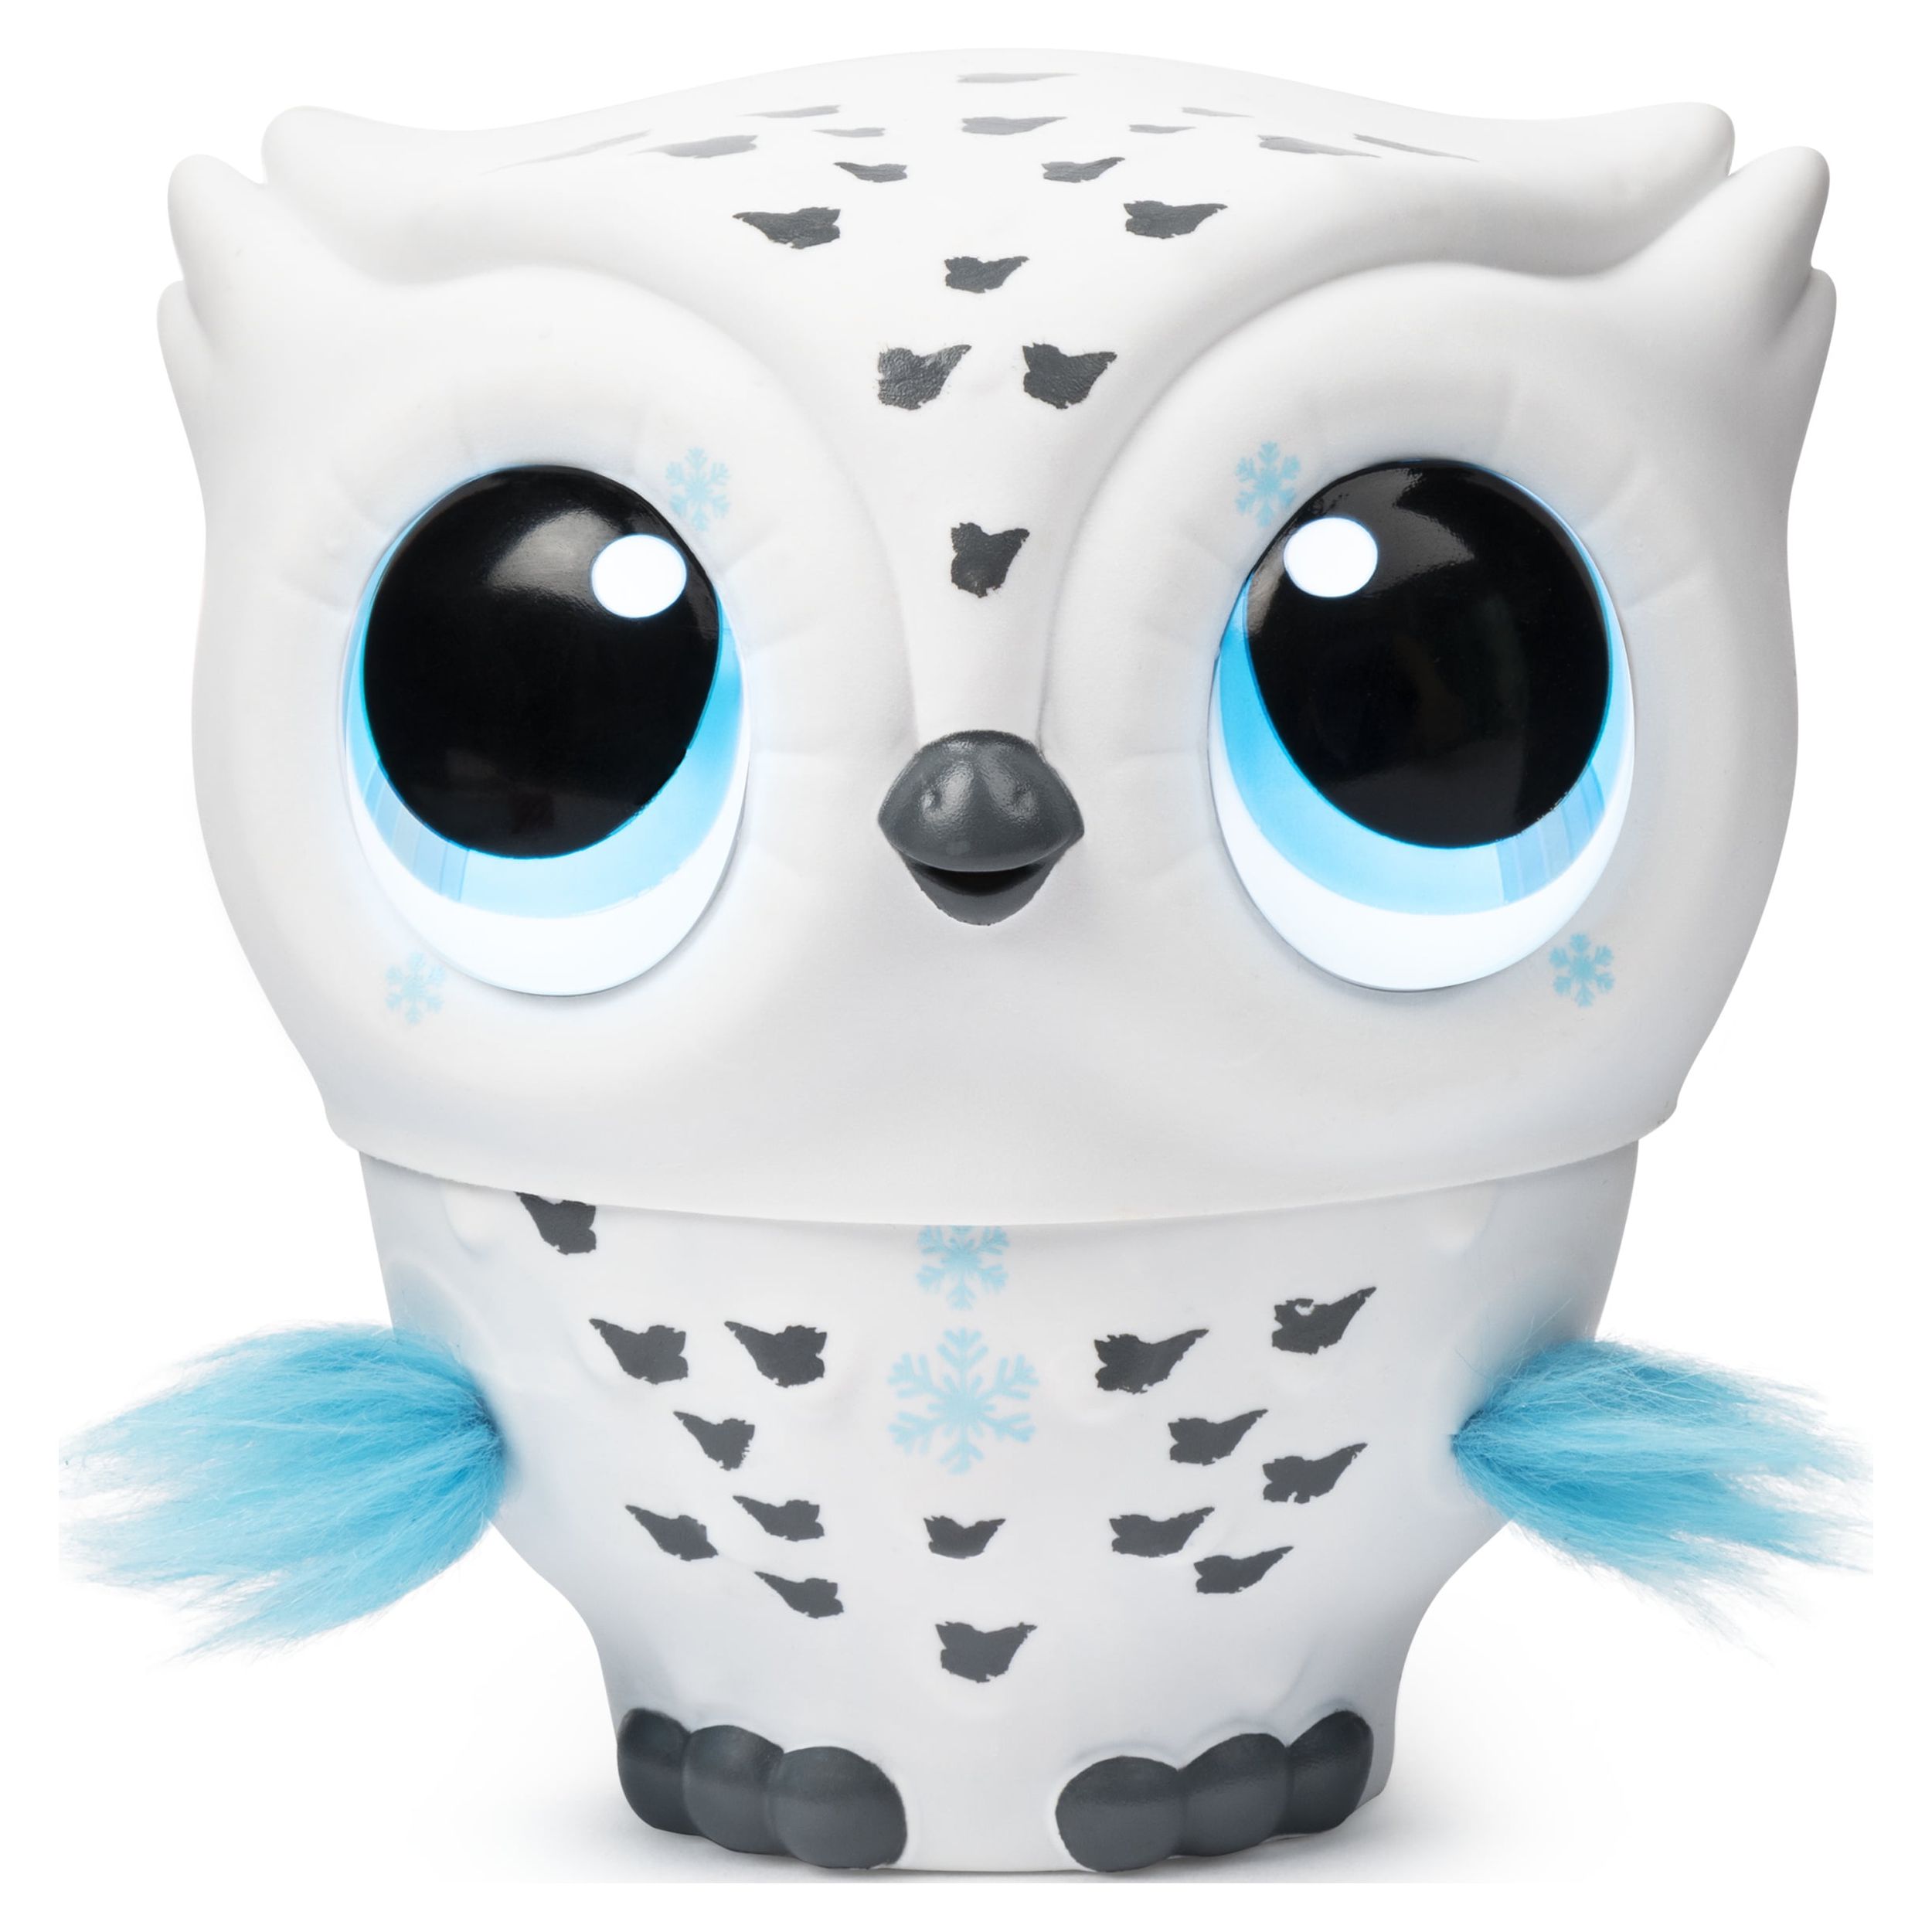 Owleez, Flying Baby Owl Interactive Electronic Pet Toy with Lights and Sounds (White), for Kids Aged 6 and up - image 1 of 8